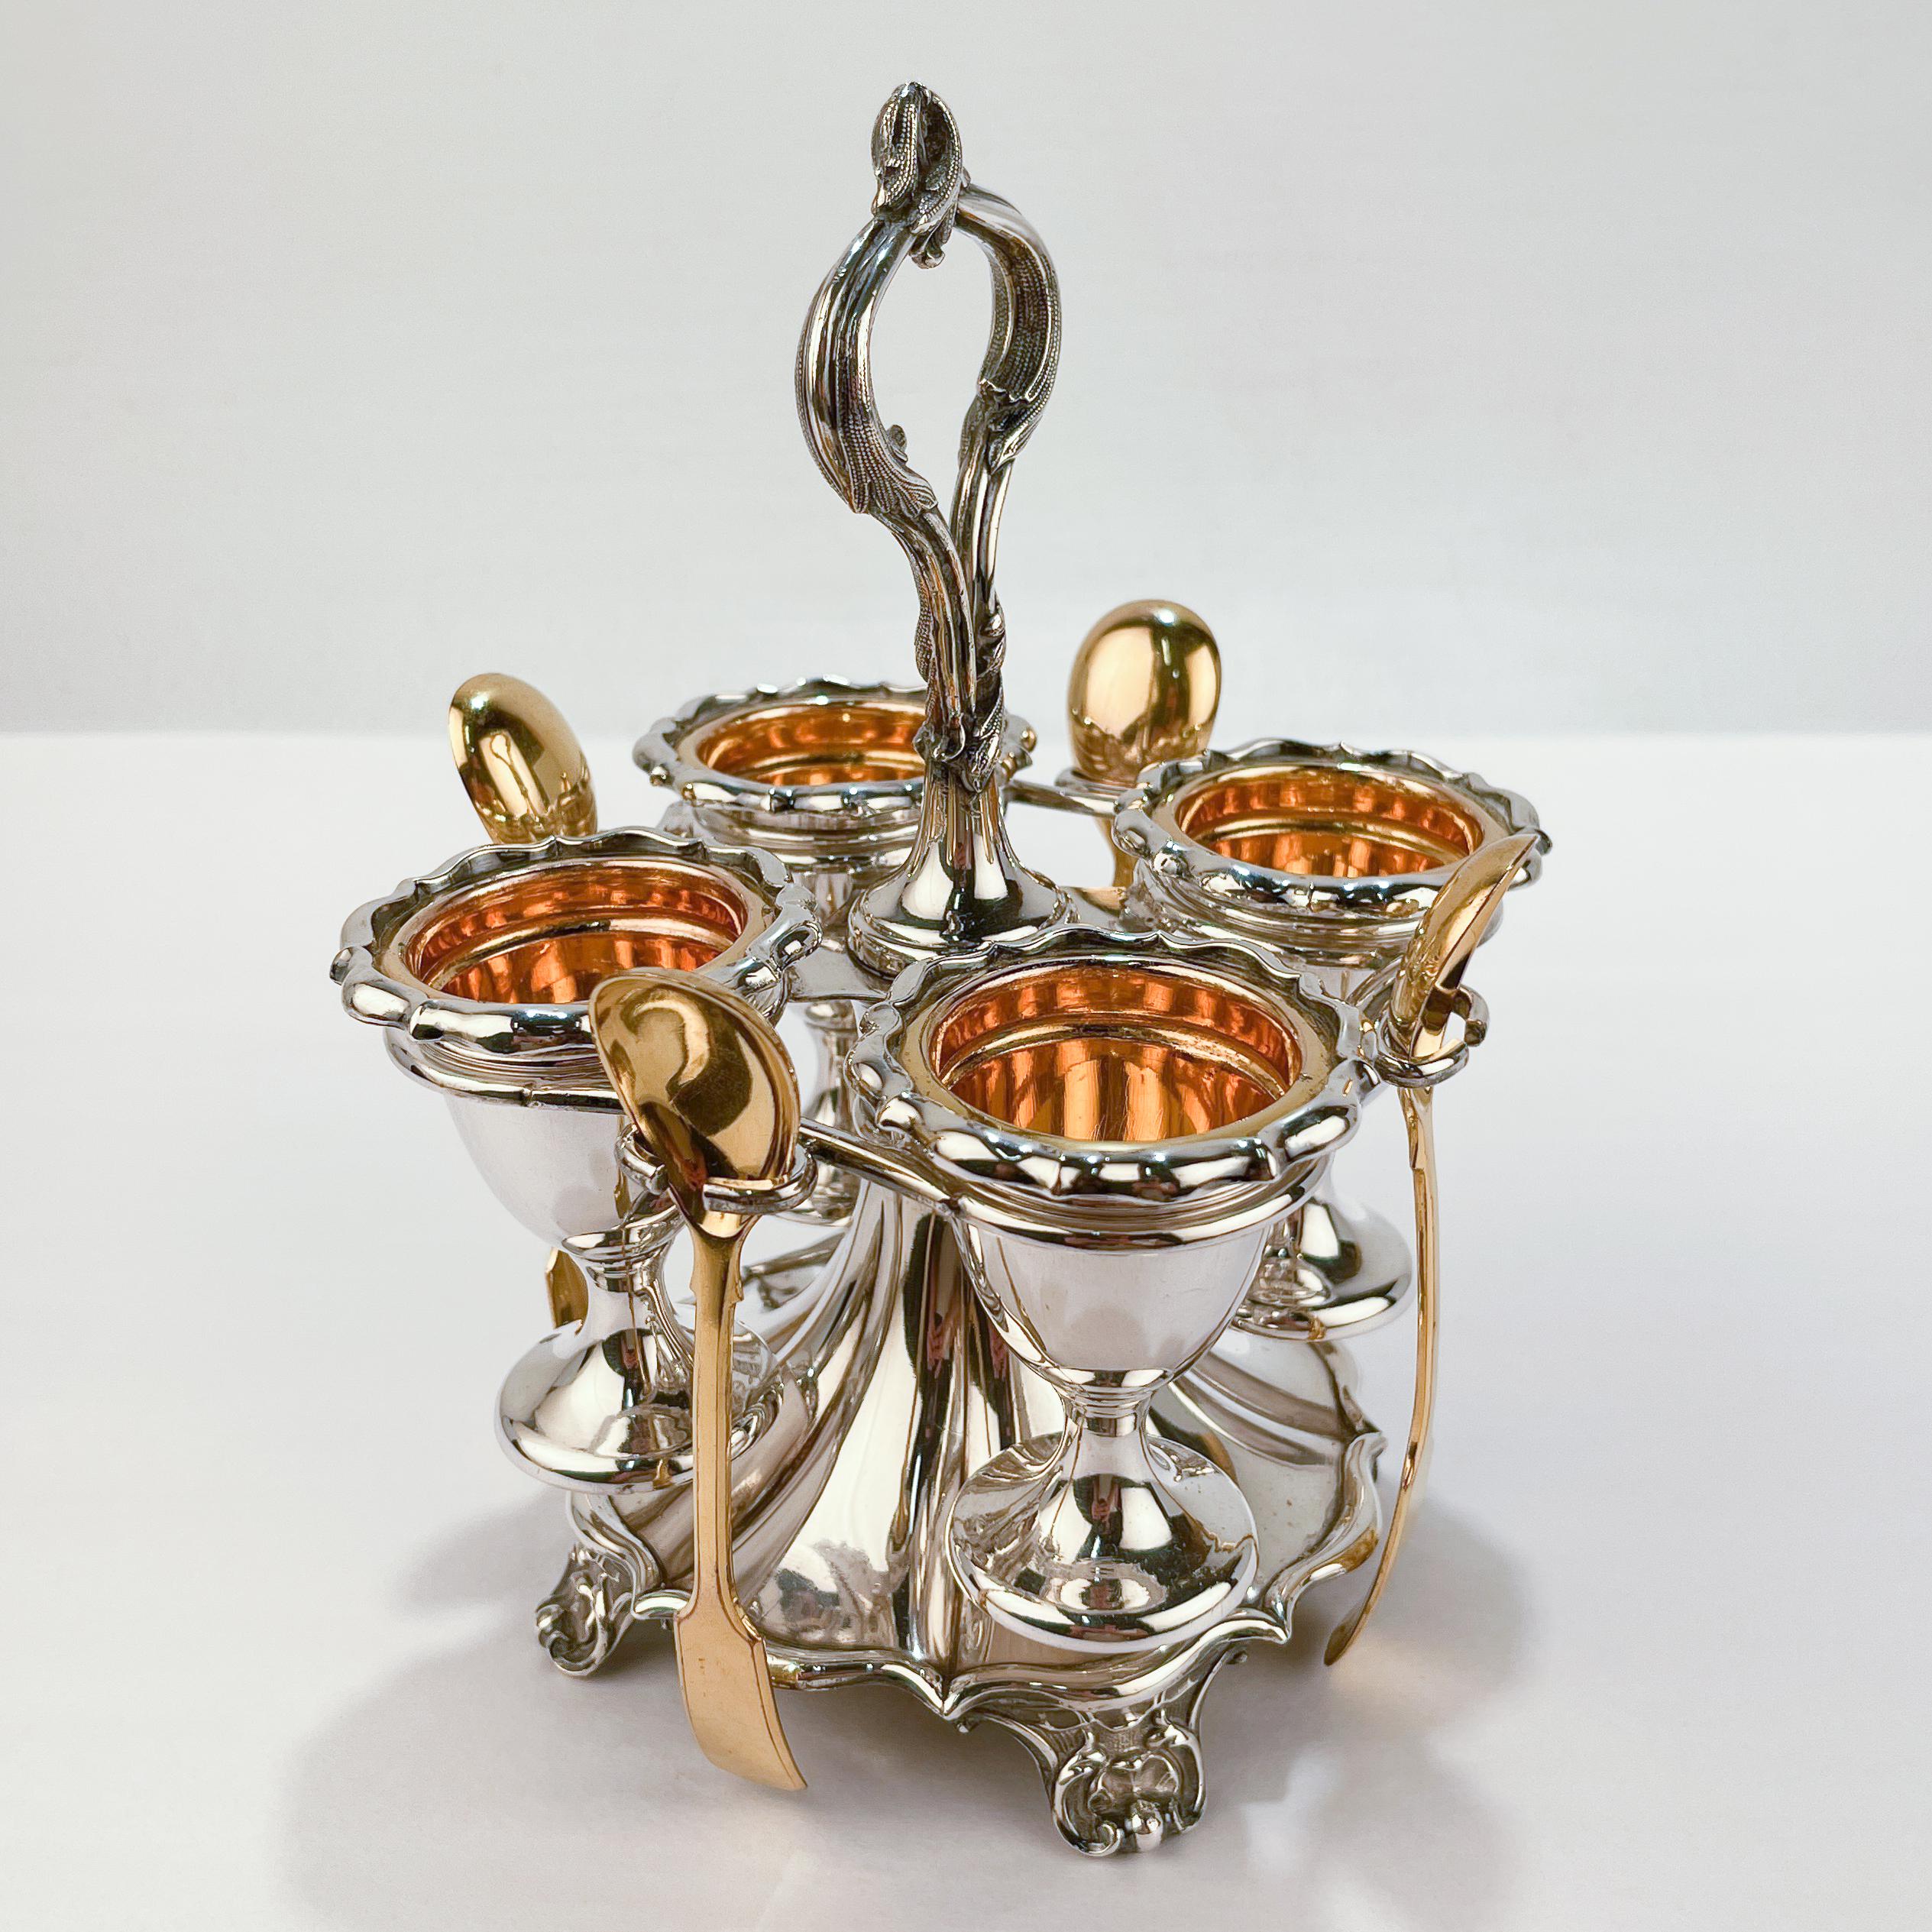 Gilt Antique 19th Century English Silver Plated Egg Cups and Stand For Sale